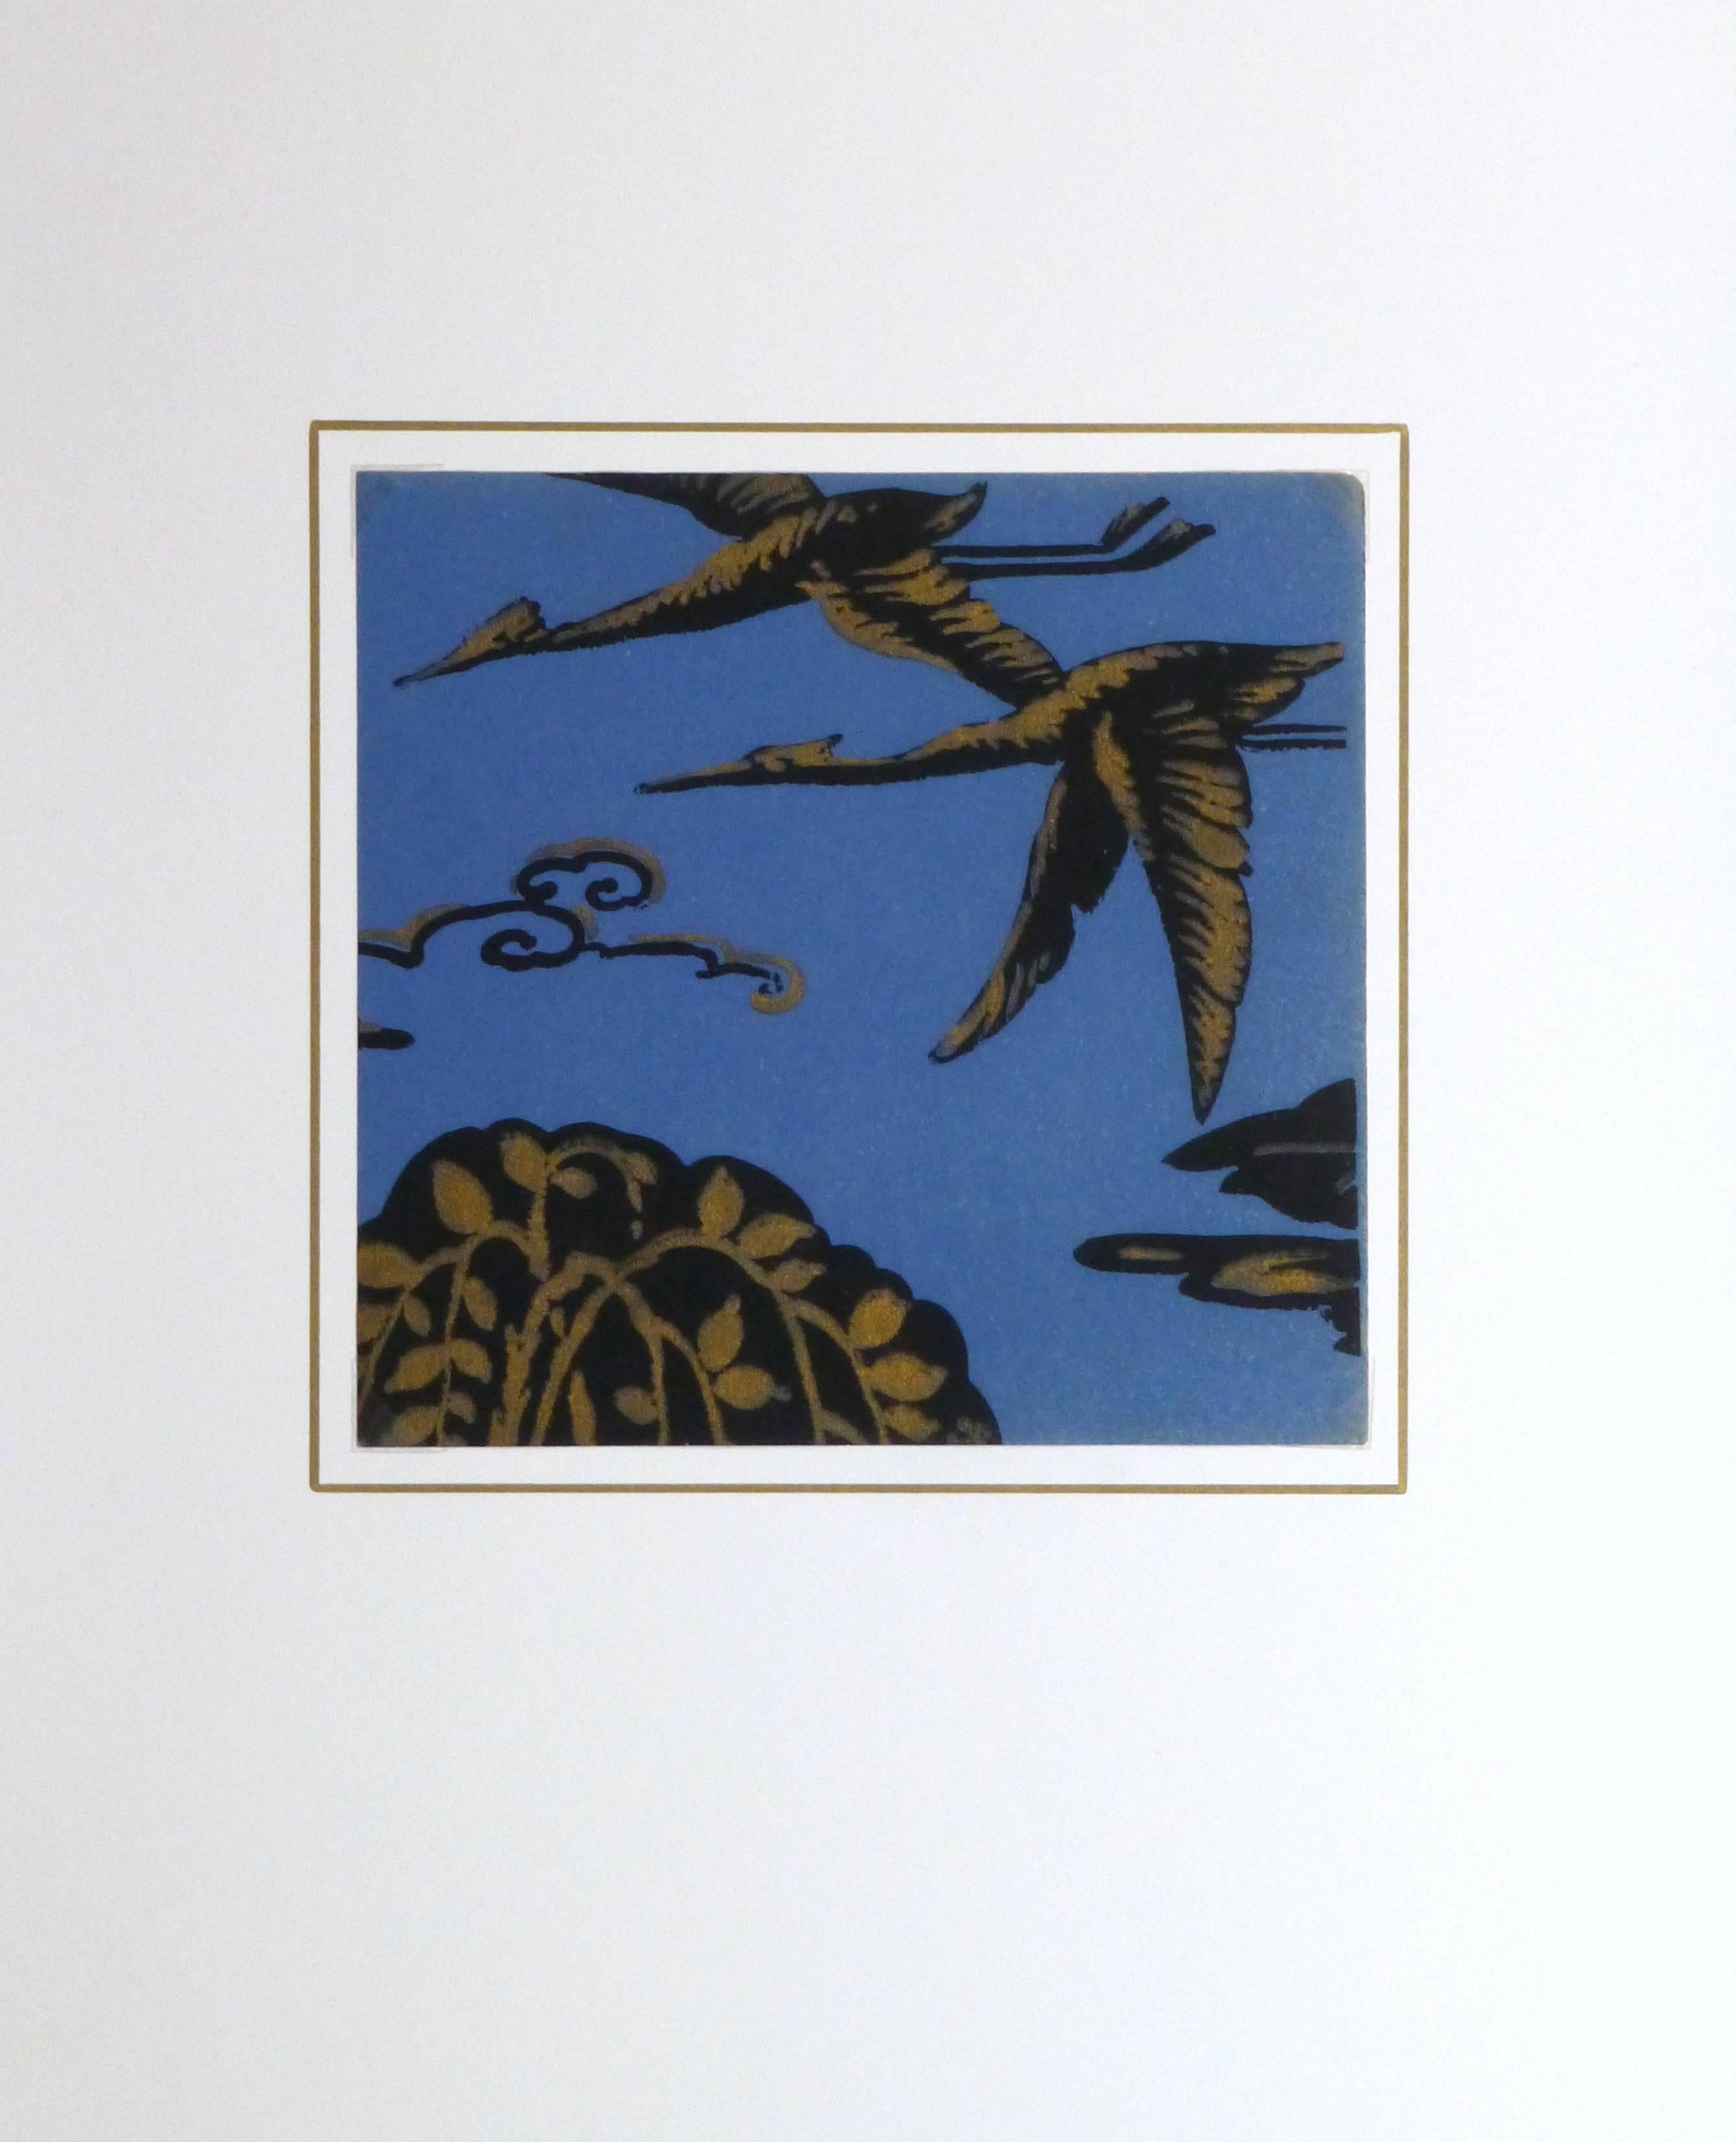 Beautiful pochoir of large storks in flight against a blue background and highlighted in gold, created by Vanderborght of Brussels, circa 1925. 

Original artwork on paper displayed on a white mat with a gold border. Archival plastic sleeve and